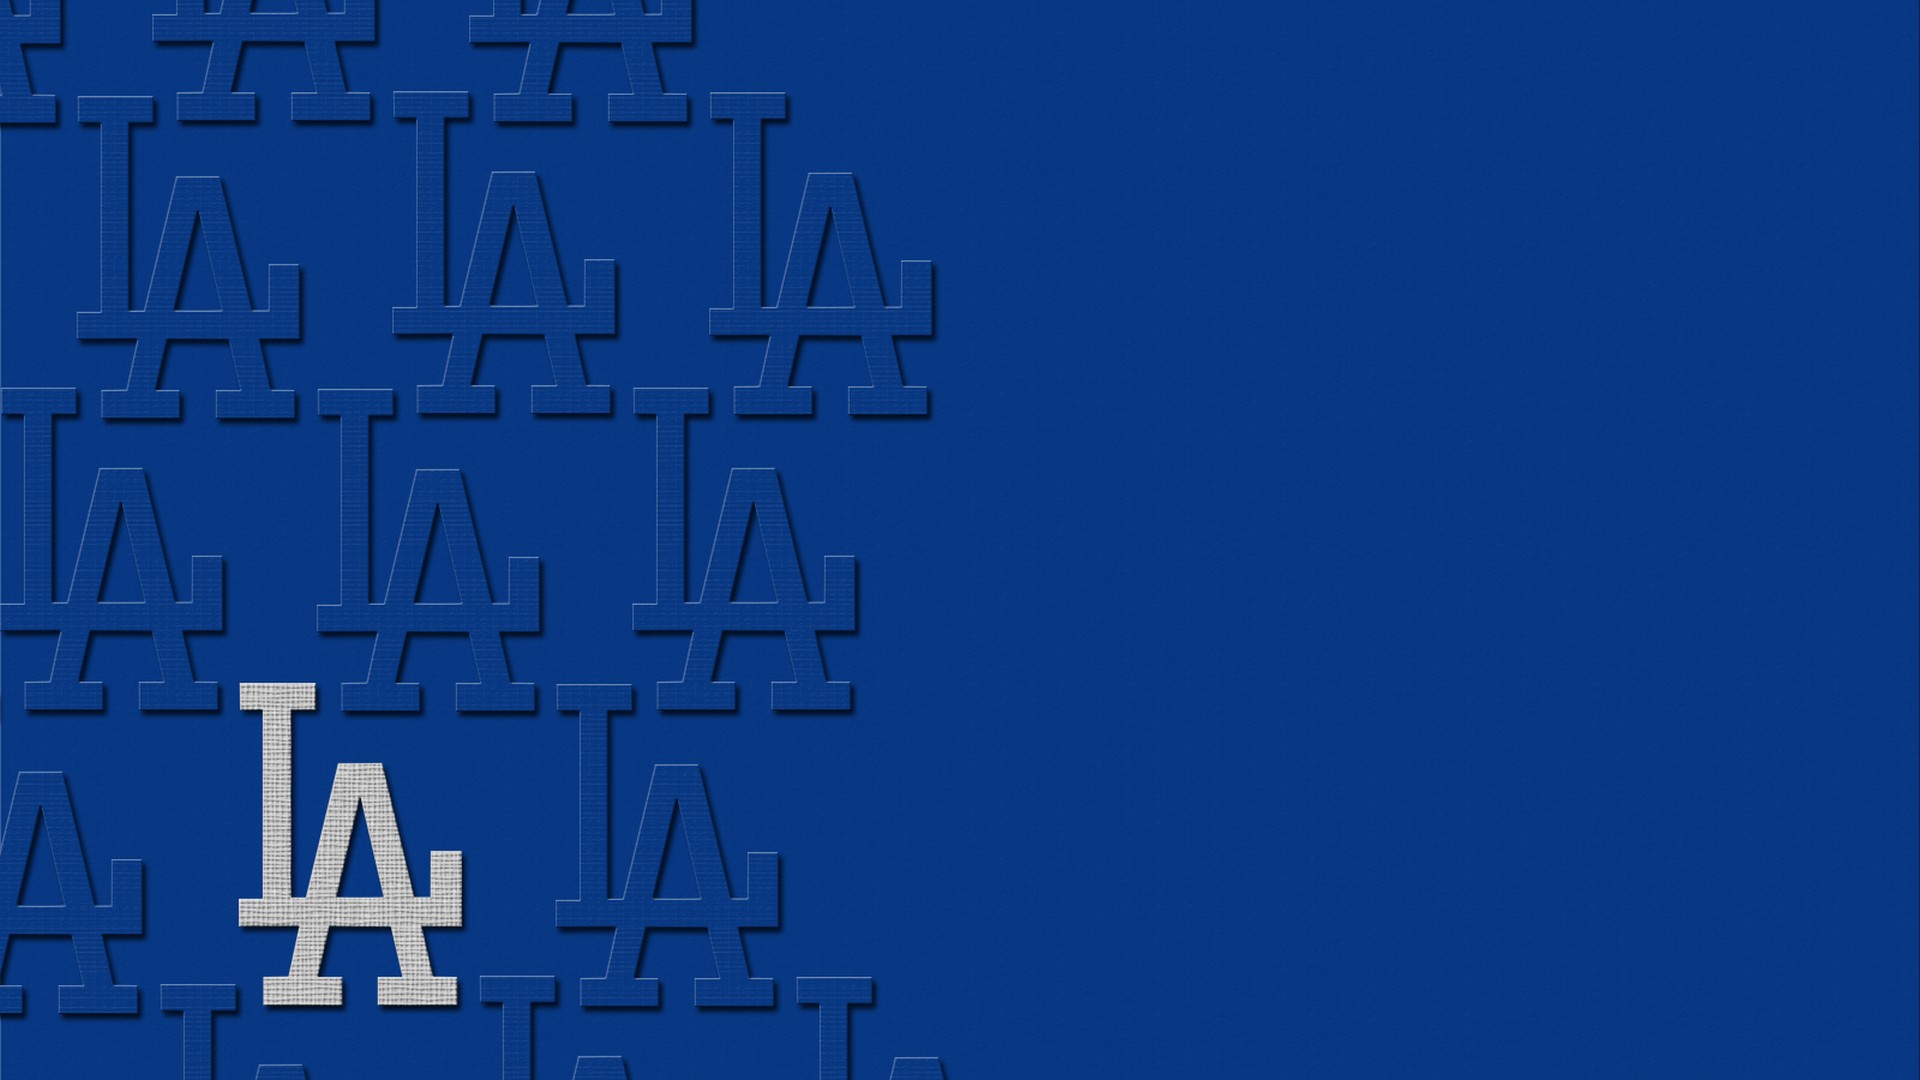 Los Angeles Dodgers Wallpaper For Mac With high-resolution 1920X1080 pixel. You can use this wallpaper for Mac Desktop Wallpaper, Laptop Screensavers, Android Wallpapers, Tablet or iPhone Home Screen and another mobile phone device